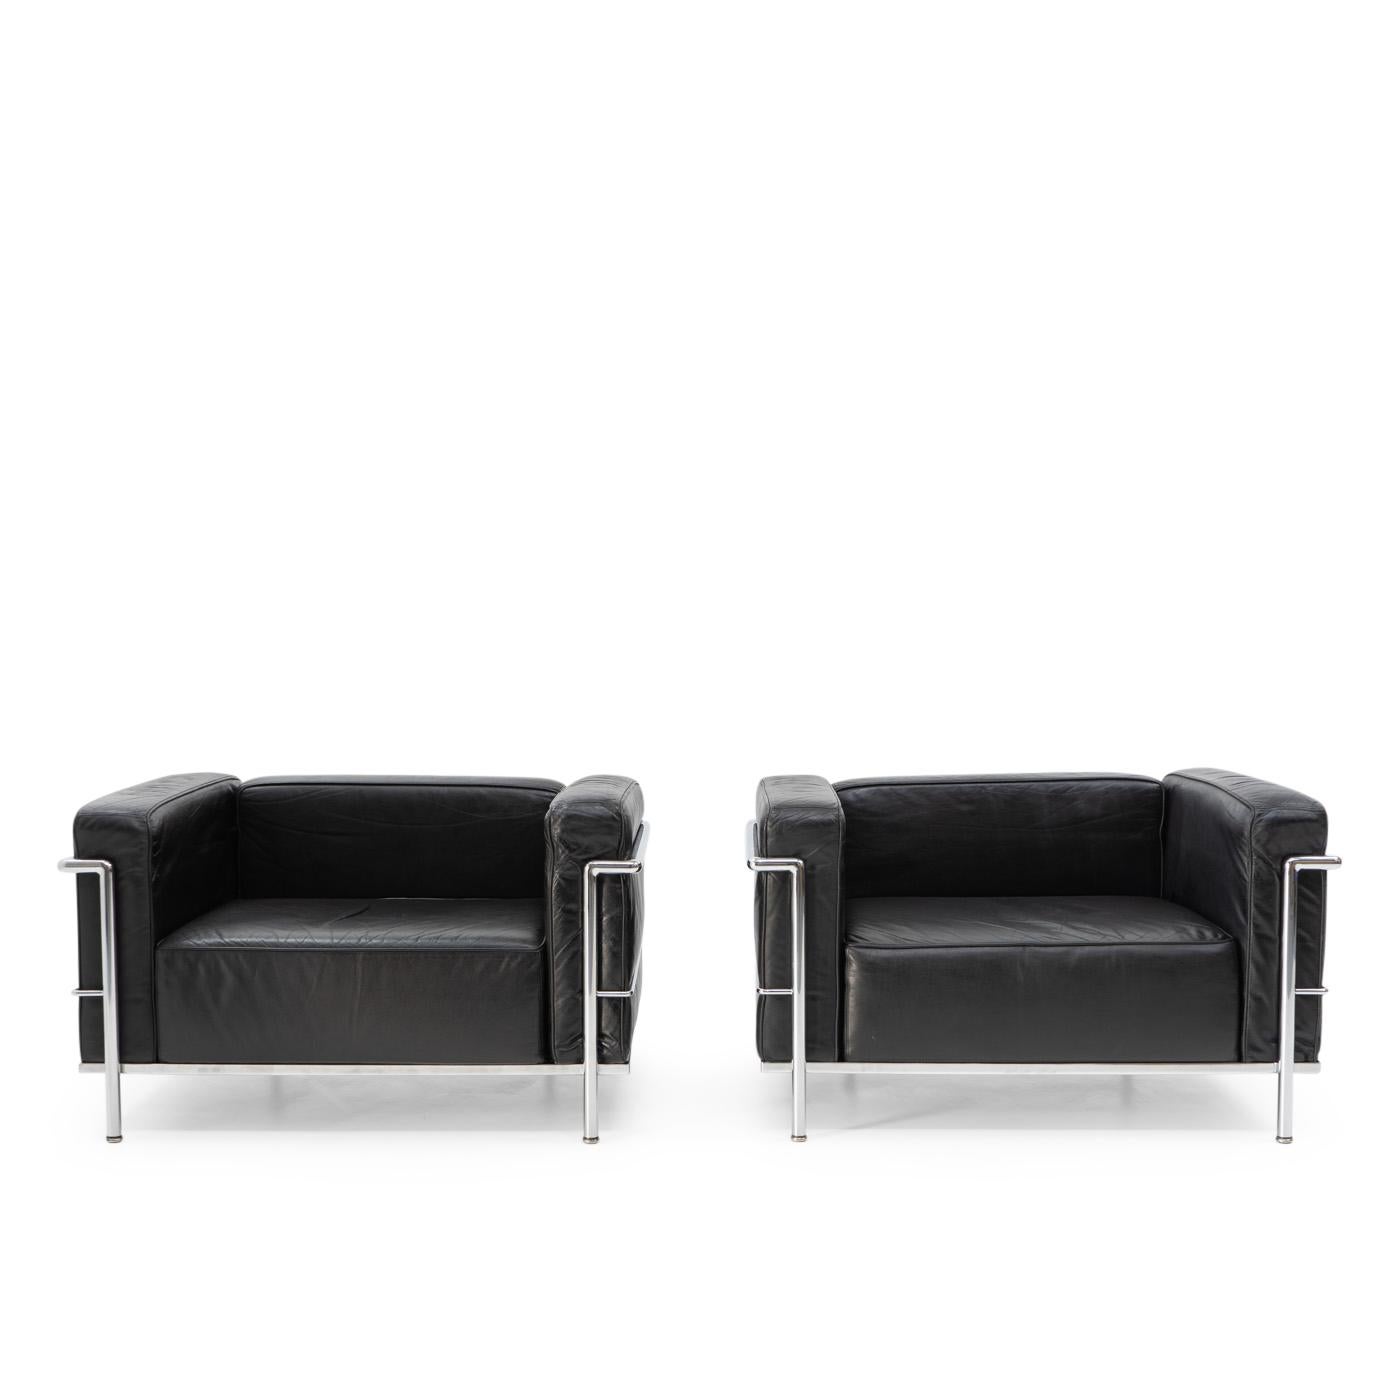 Early LC3 Lounge Chairs, Le Corbusier by Cassina, 1970s For Sale 5